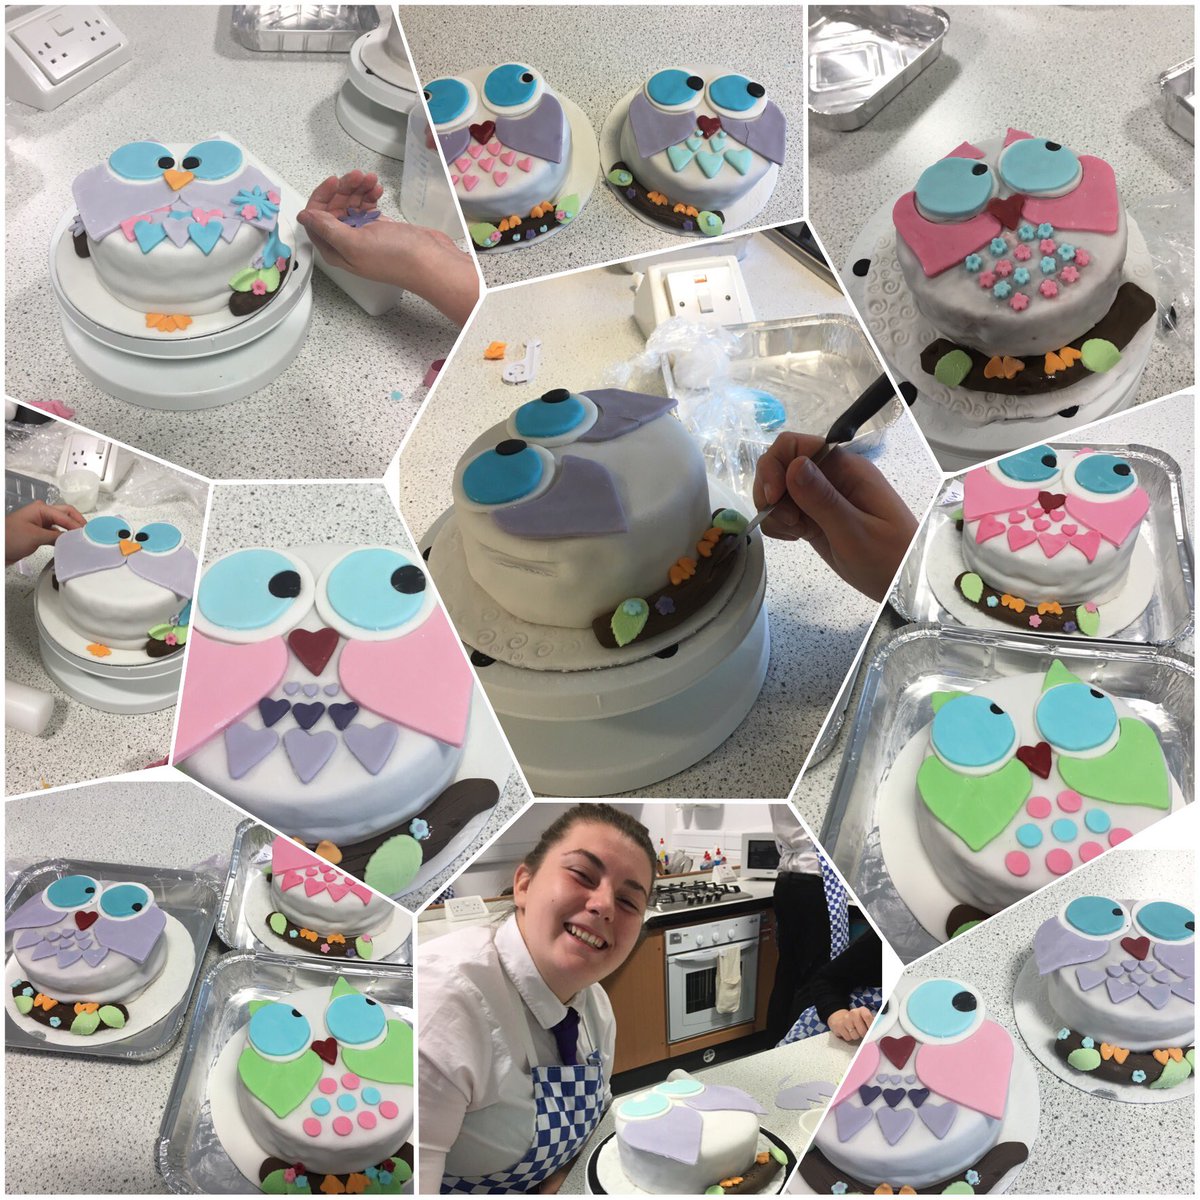 Owl Madeira cakes made by S5/6, using fondant icing and commercial cutters. Beautiful!!#improvingskills